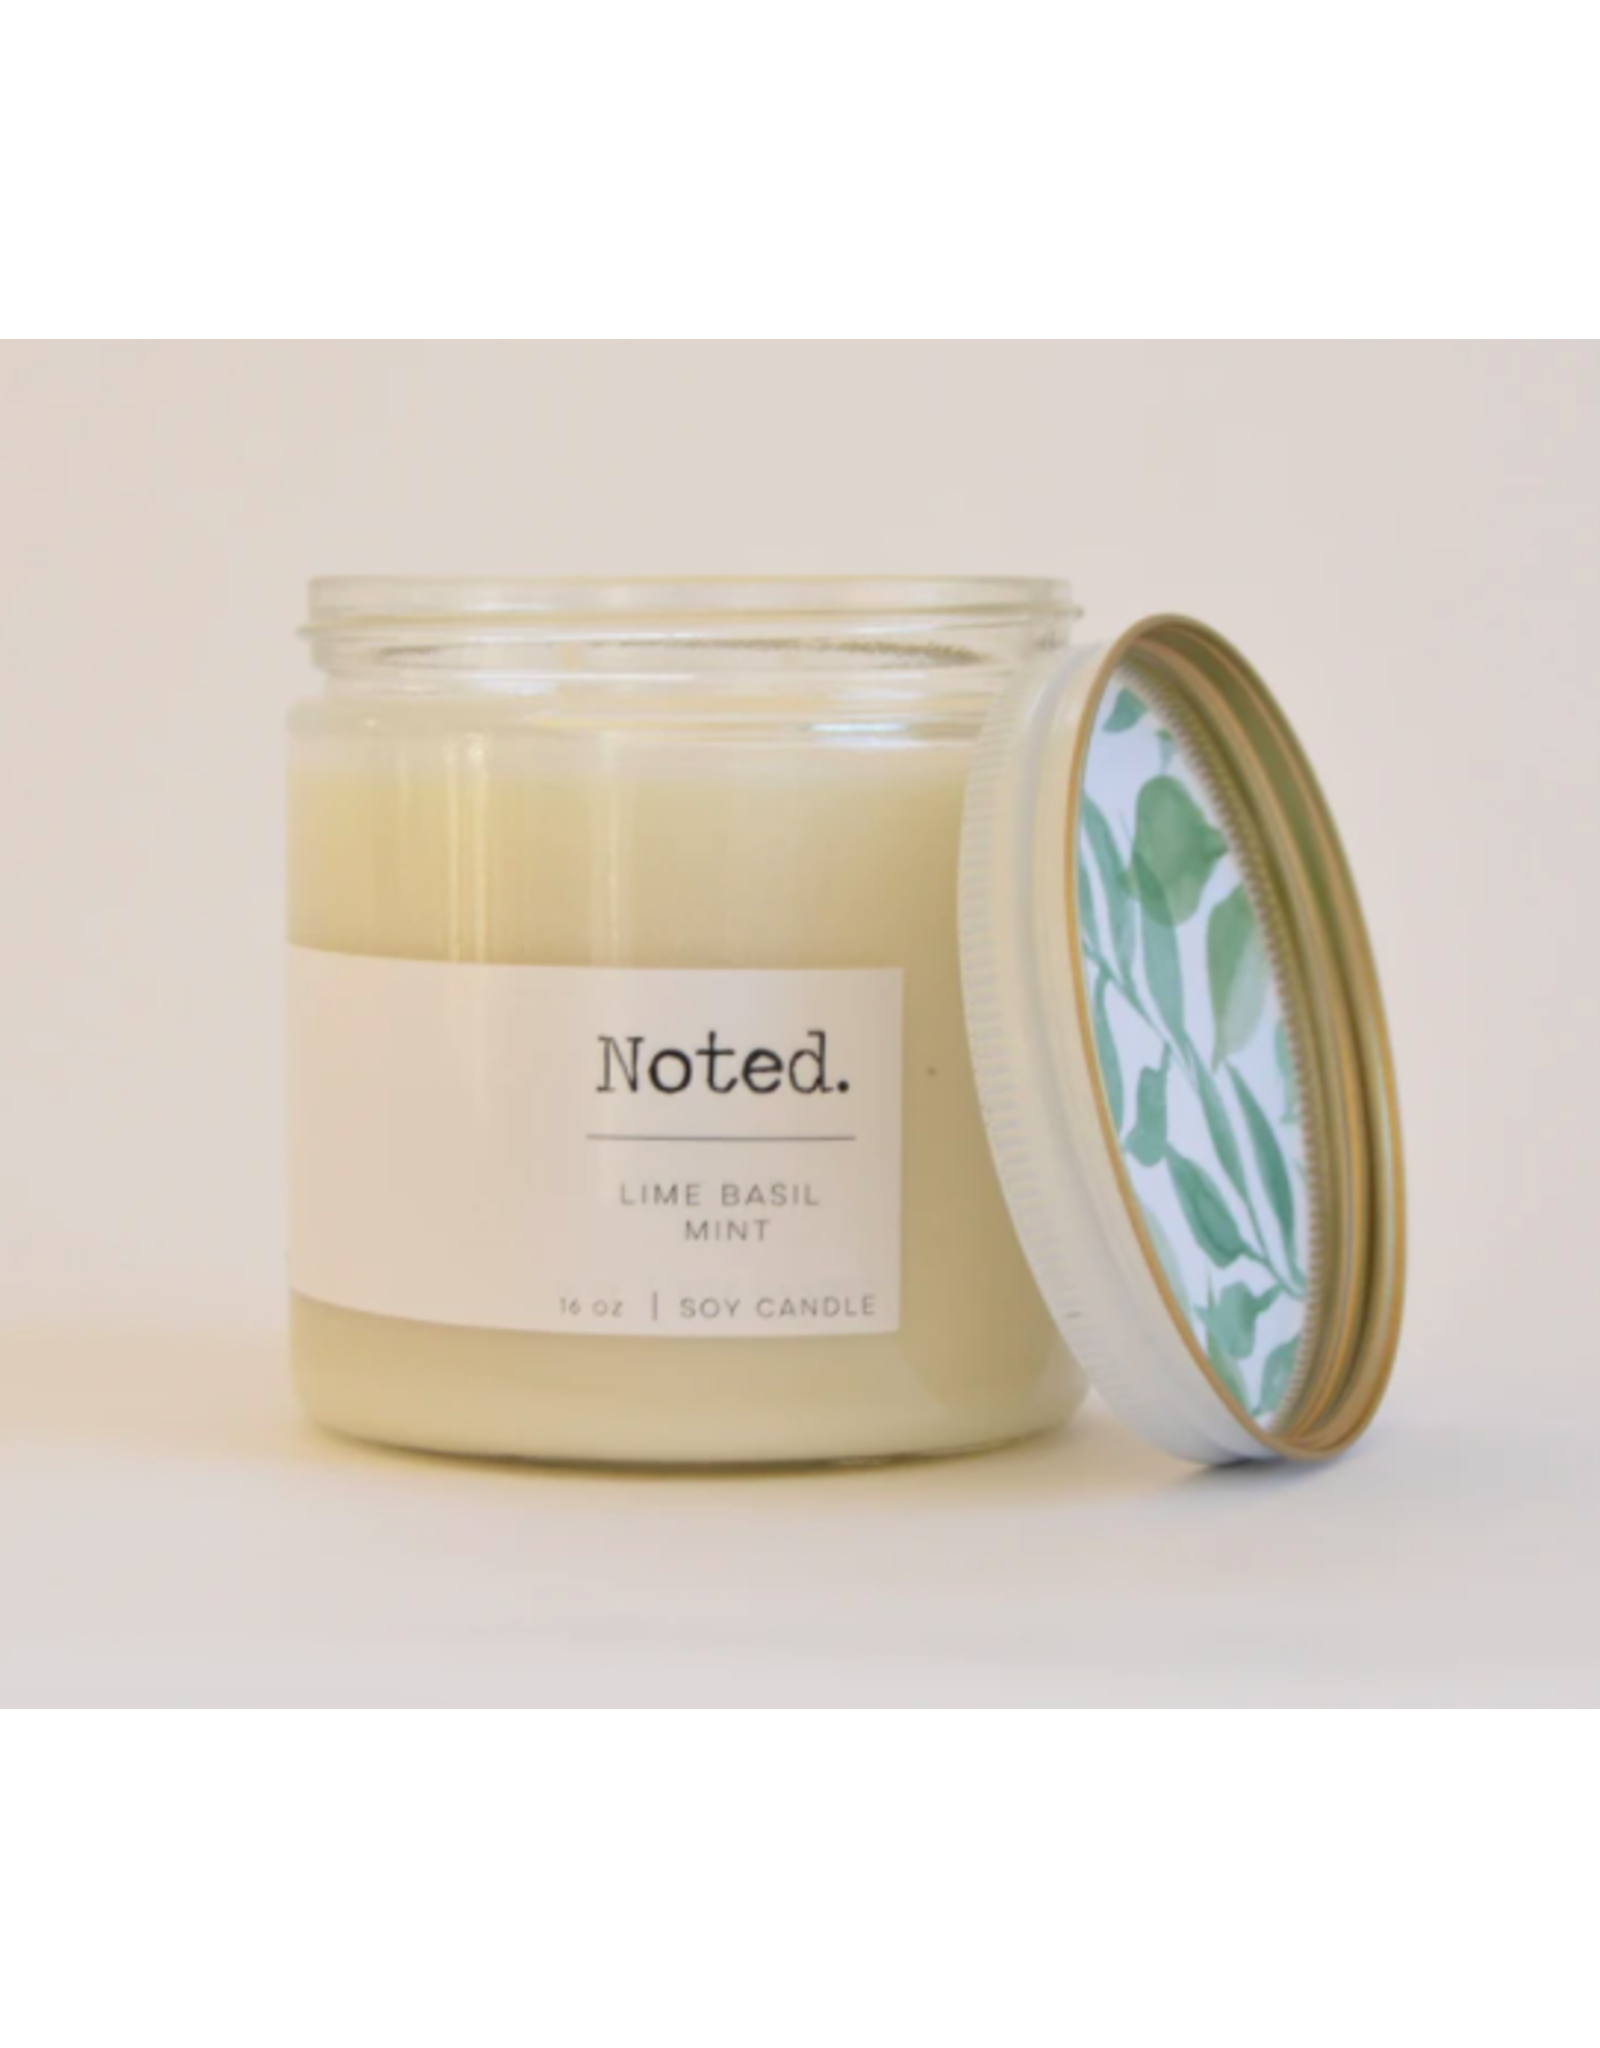 Noted Lime Basil Mint Candle 8 oz